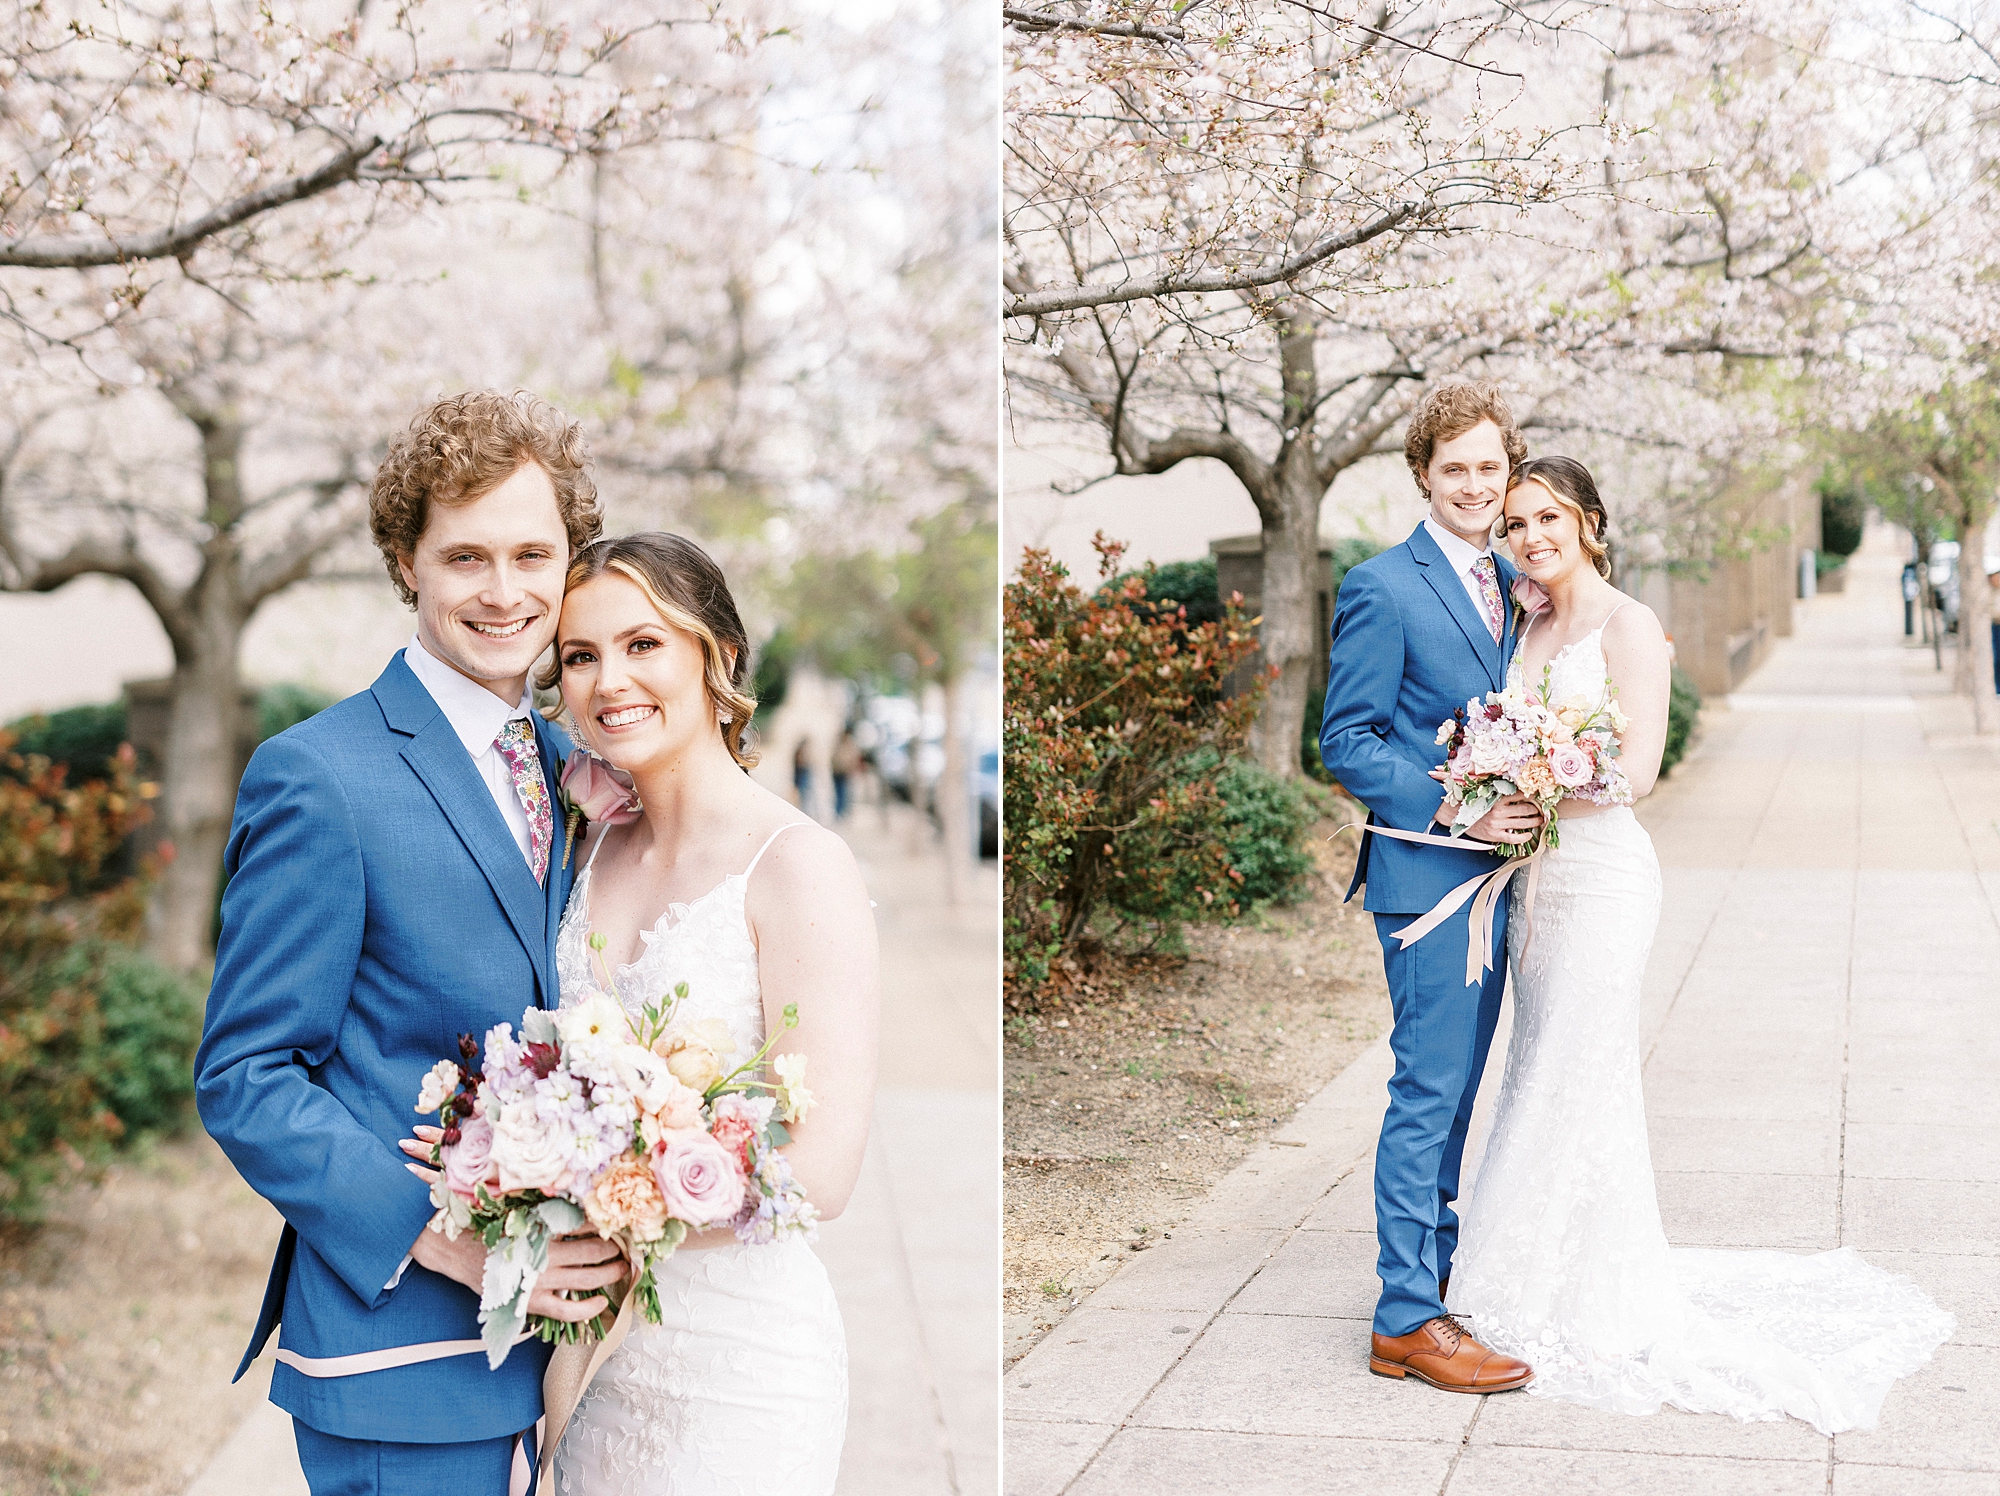 couple hugs by cherry blossom trees during spring wedding photos